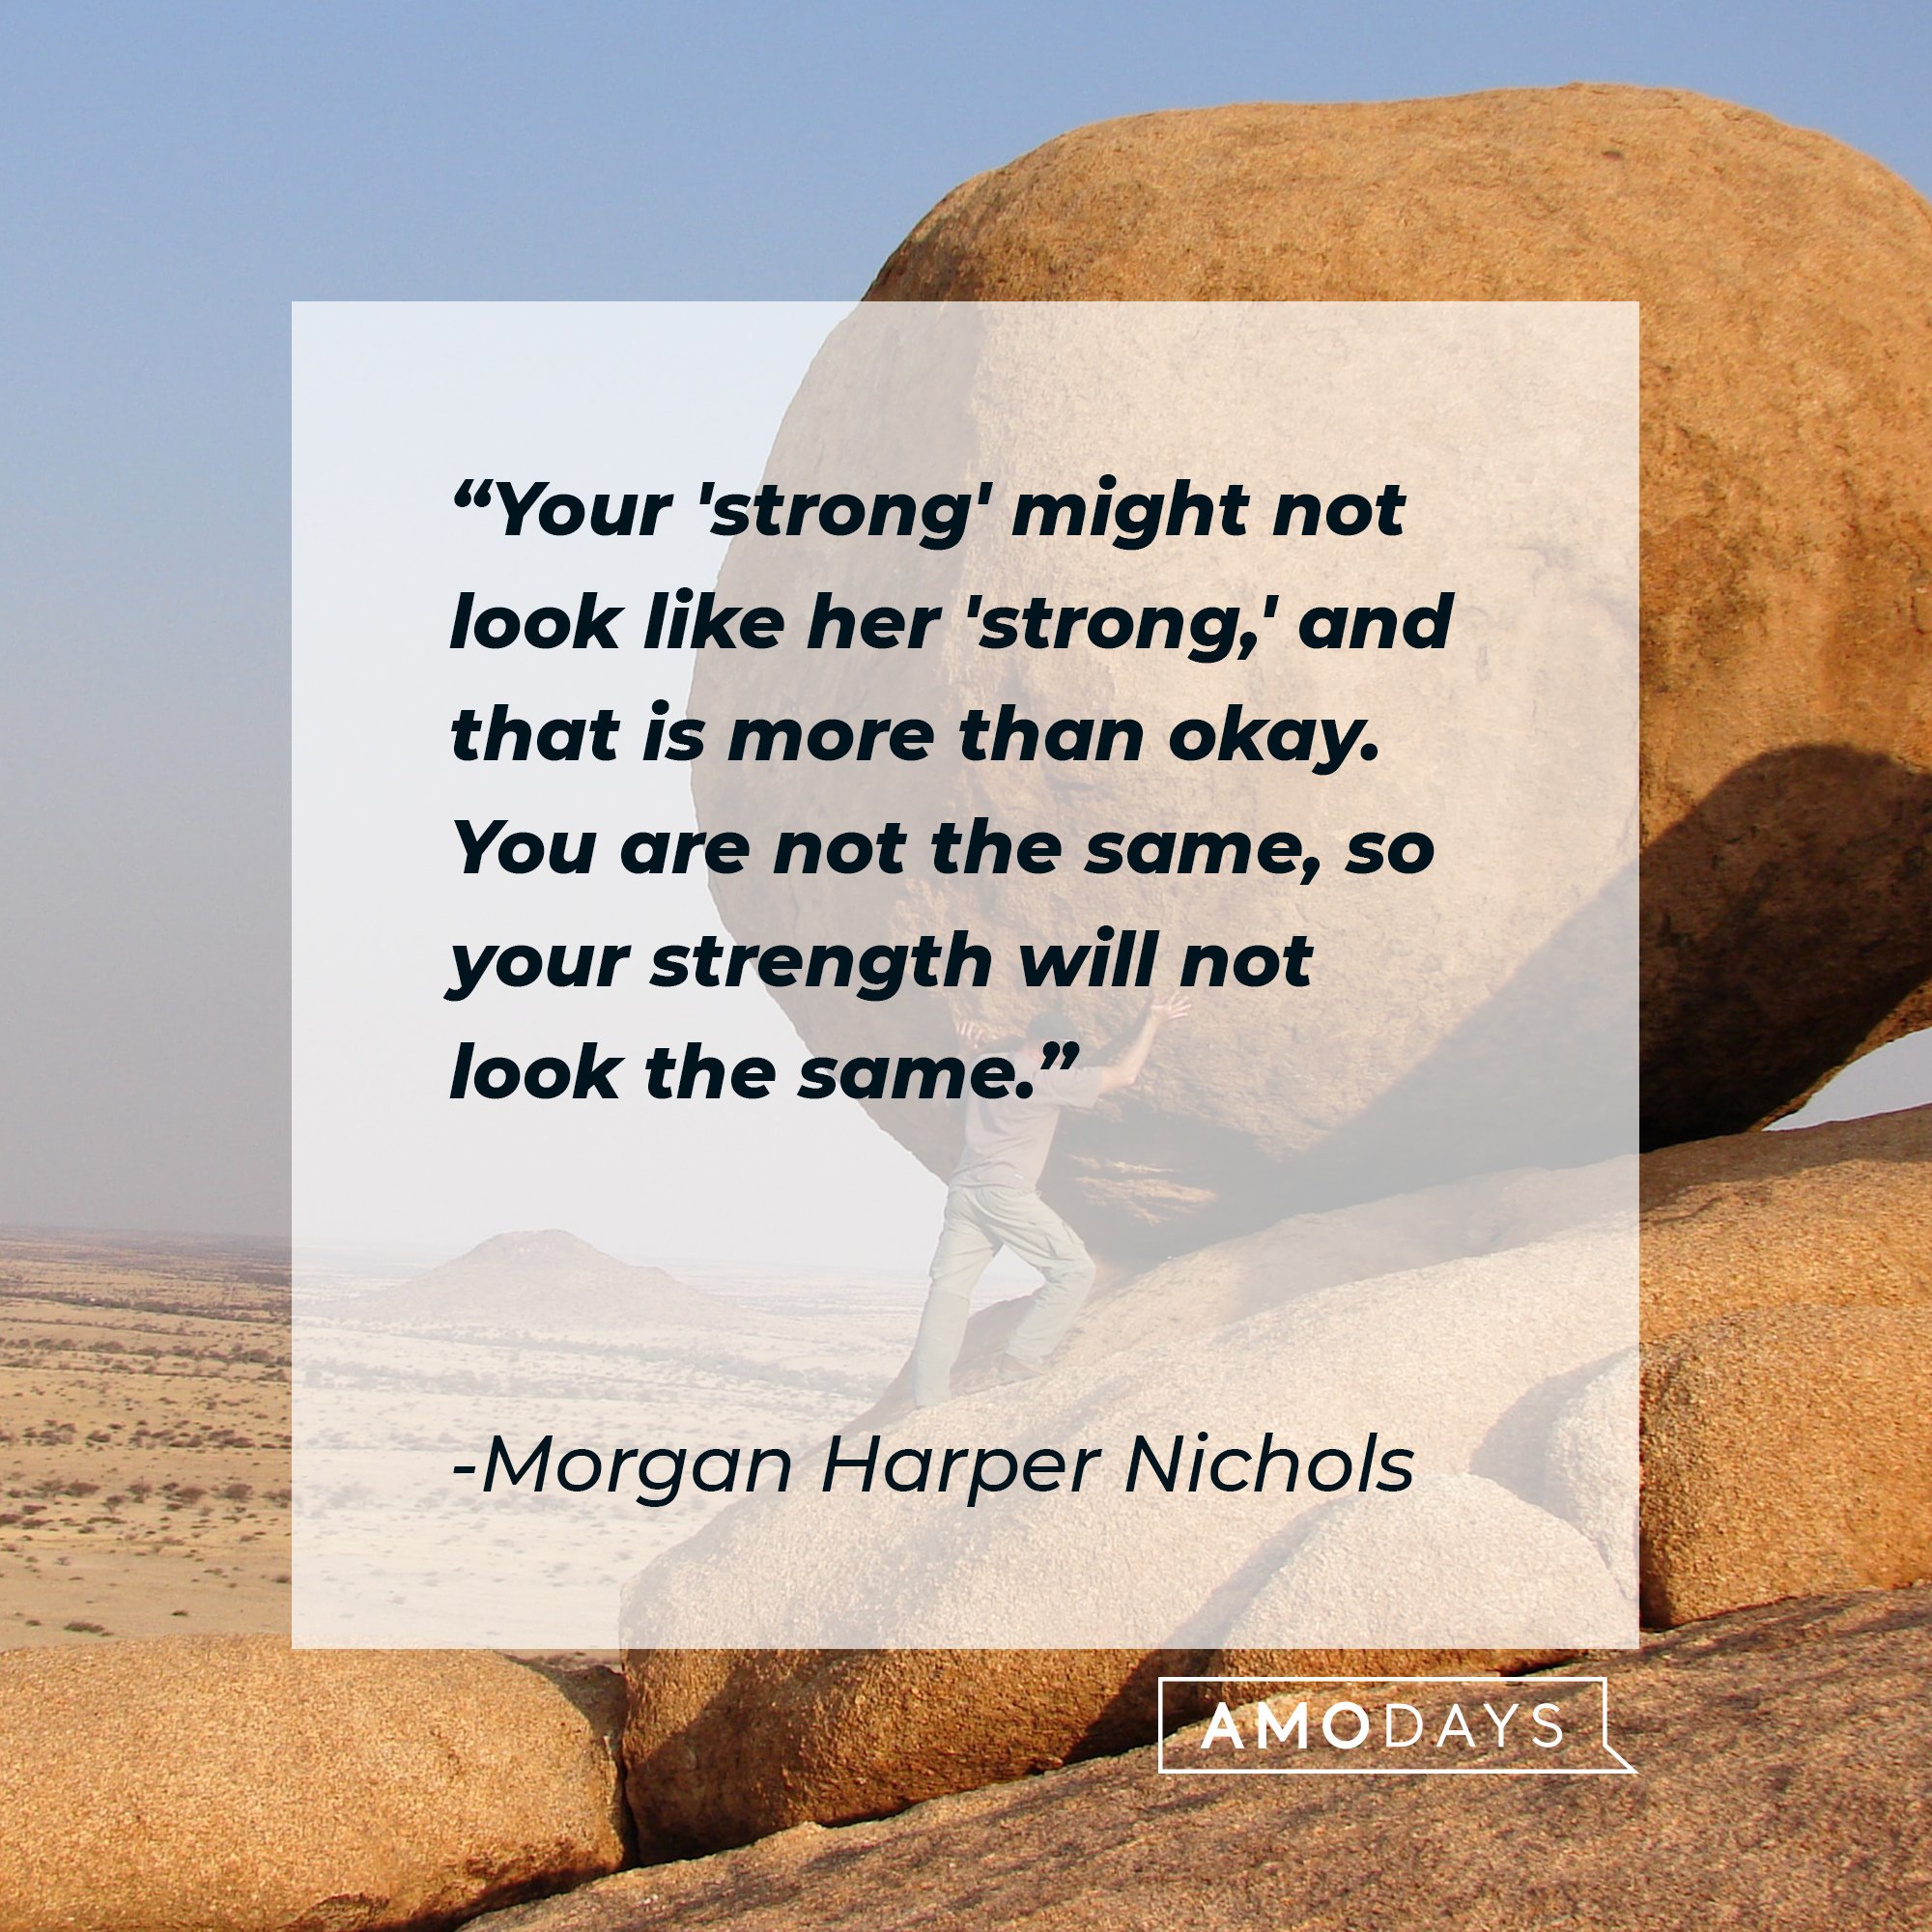 Morgan Harper Nichols’ quote: "Your 'strong' might not look like her 'strong,' and that is more than okay. You are not the same, so your strength will not look the same." | Image: AmoDays